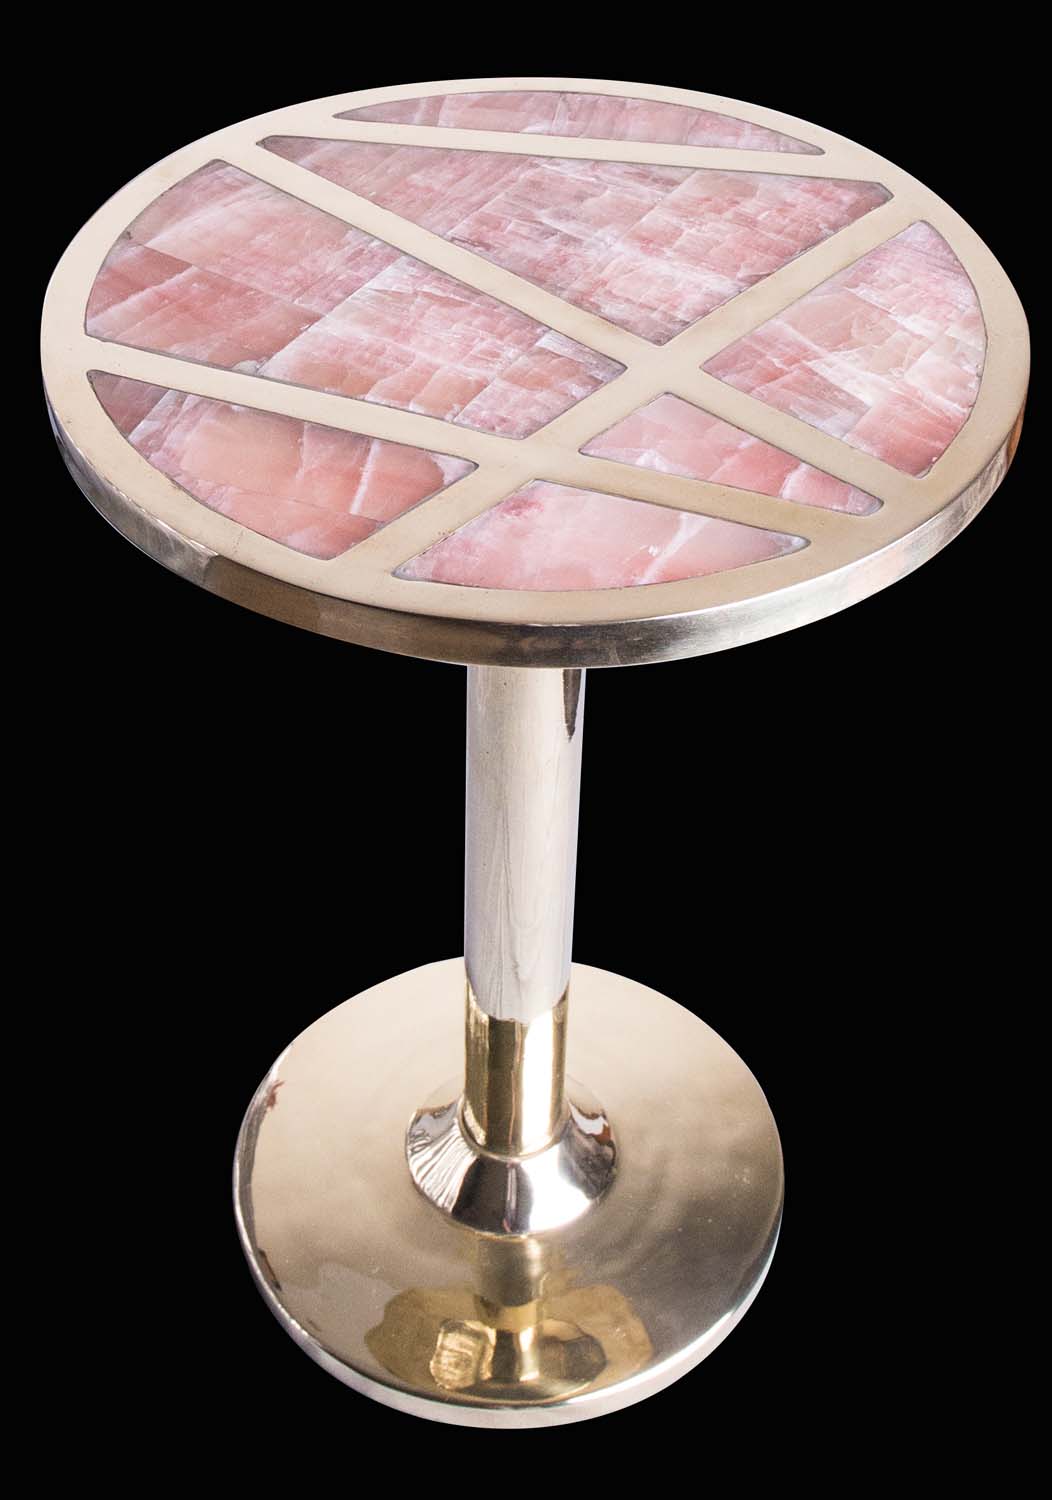 KOHR's pink calcite and brass hostess table